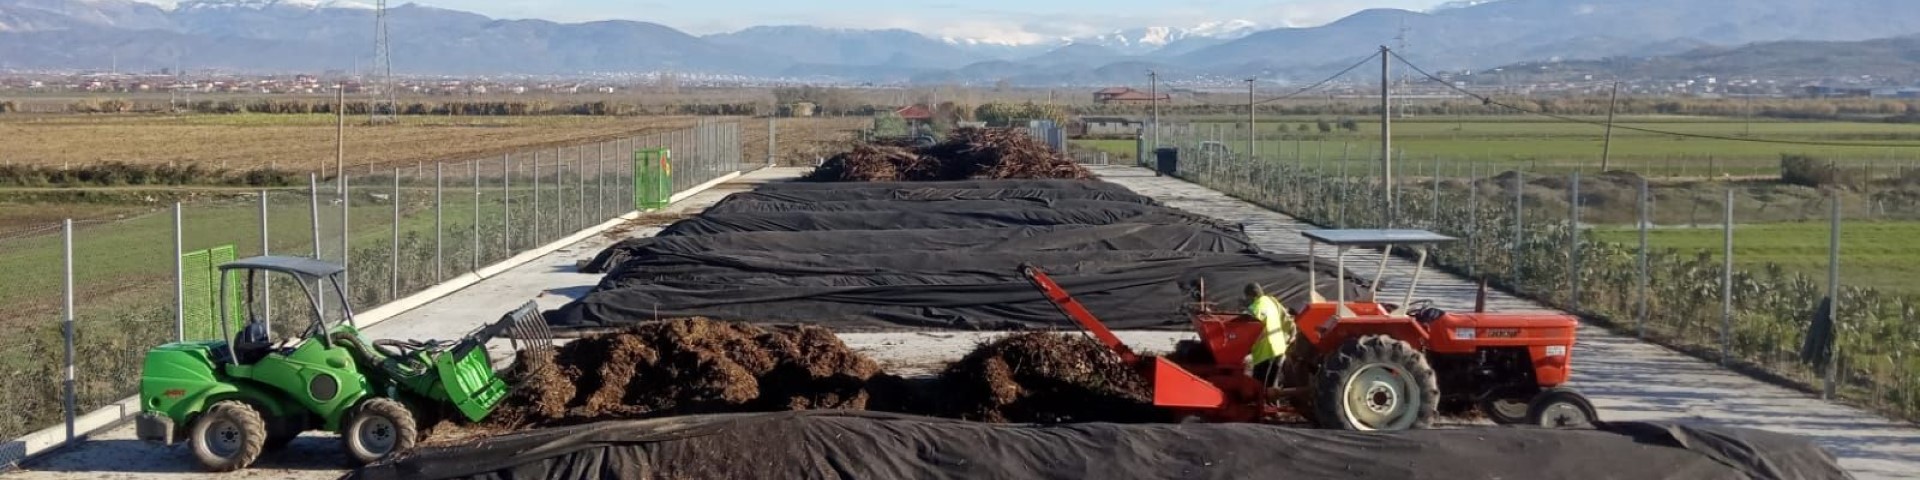 A view of the Composting Plant in Cerrik Municipality processing green waste.